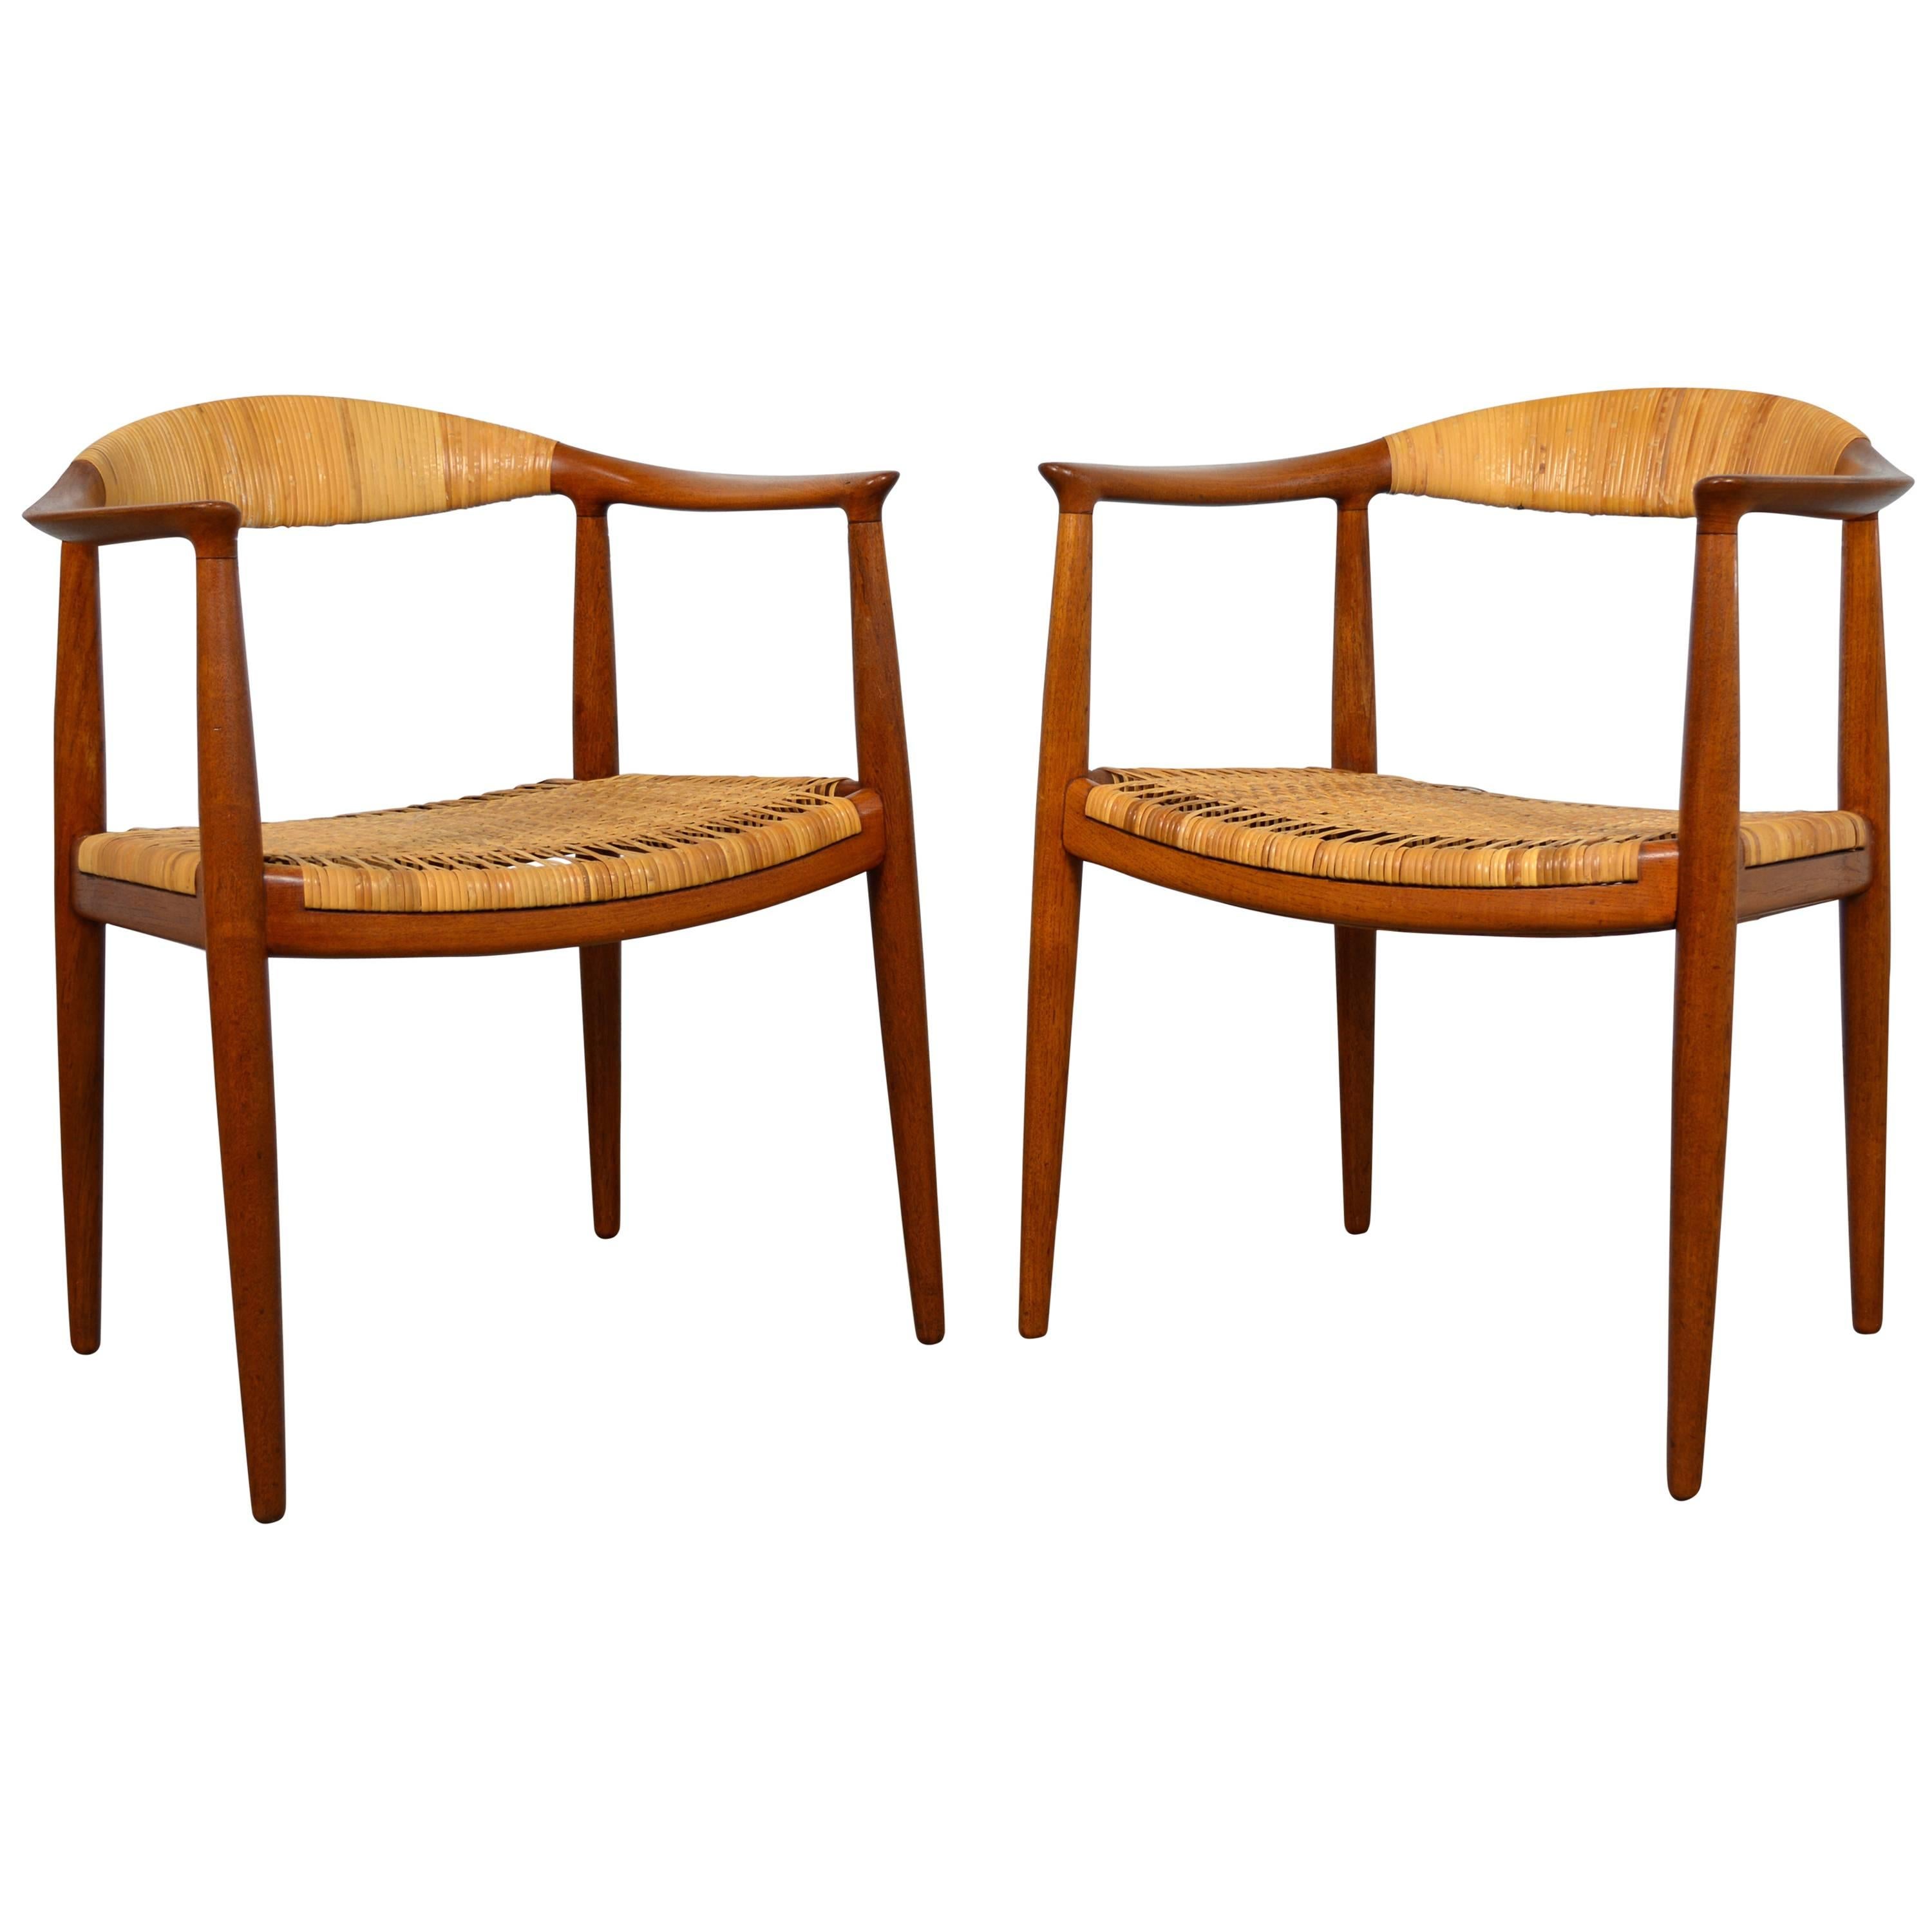 Hans Wegner Pair of "Round" Chairs in Teak and Cane